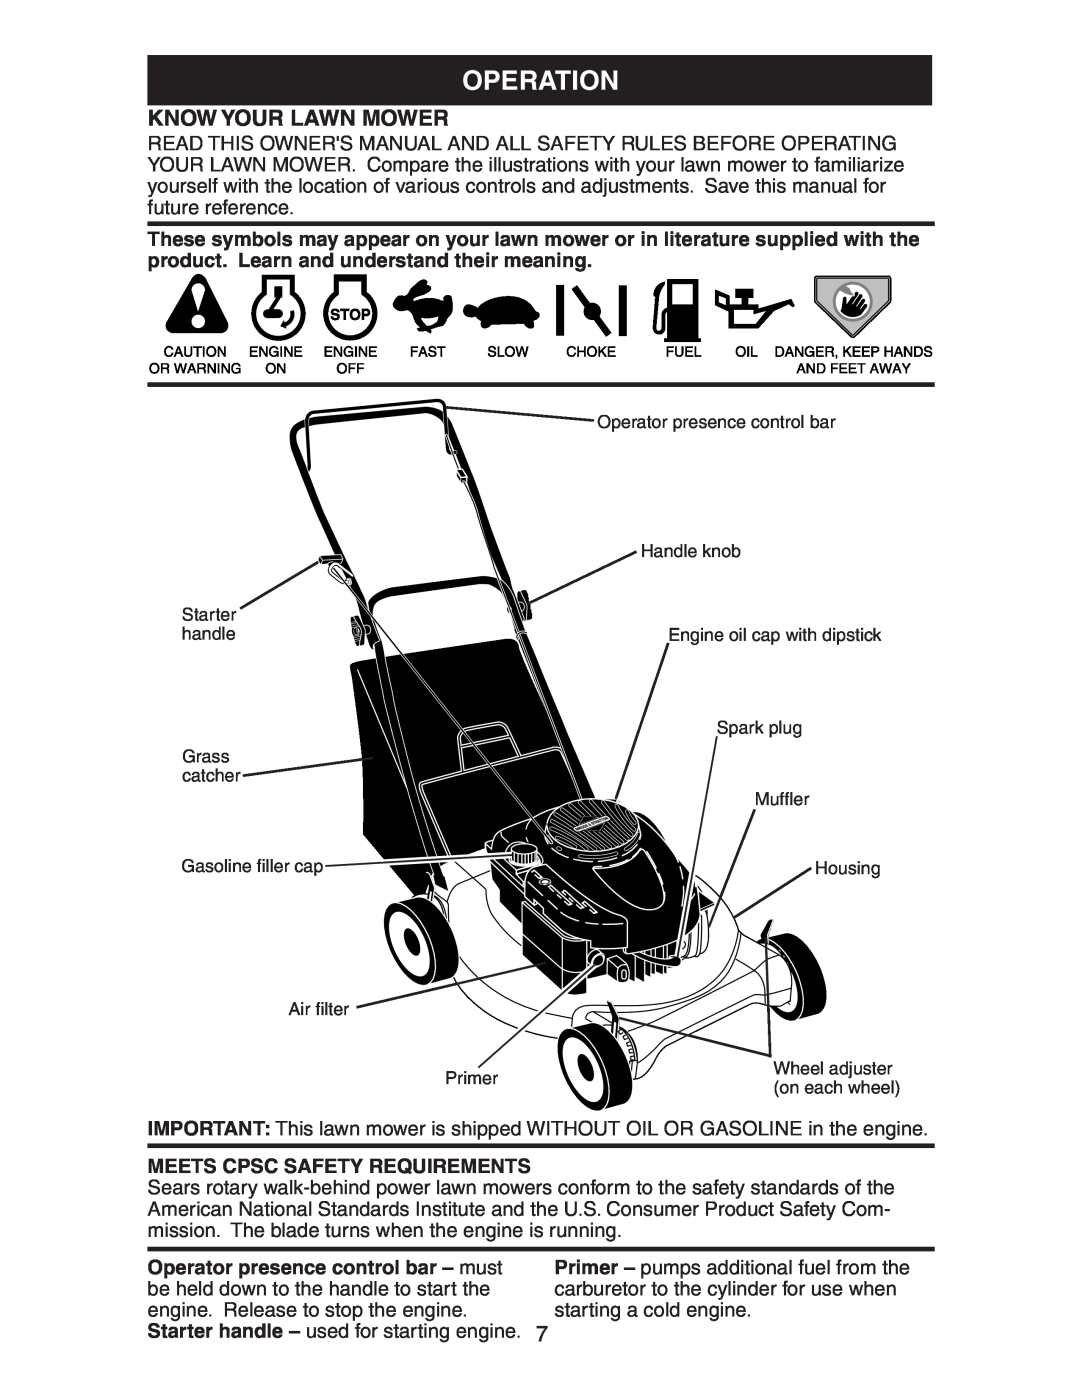 Craftsman 917.38885 owner manual Operation, Know Your Lawn Mower 